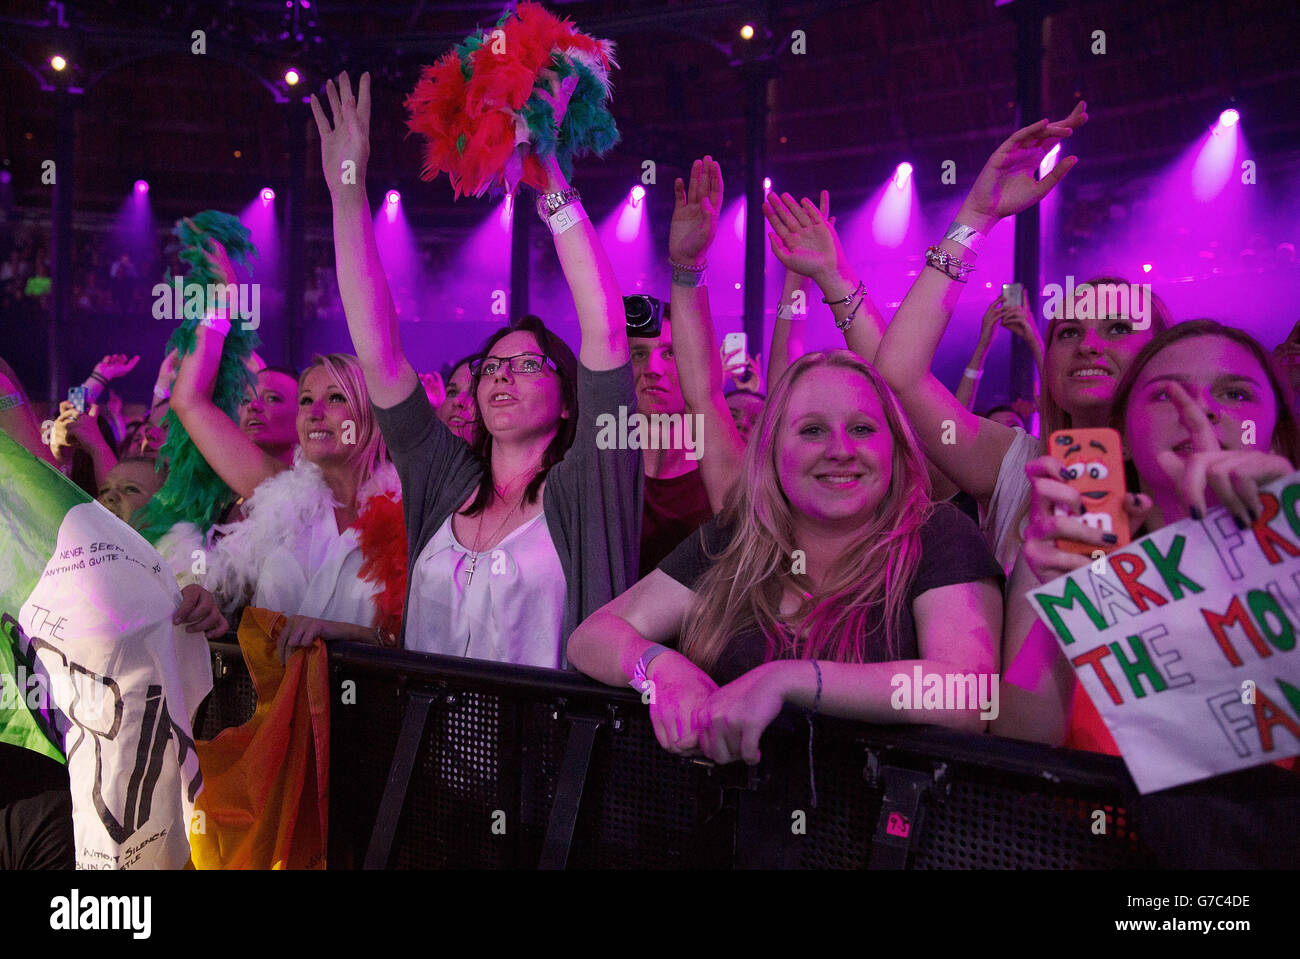 The crowd watch The Script perform on stage at the iTunes Festival at the Roundhouse in London. Stock Photo